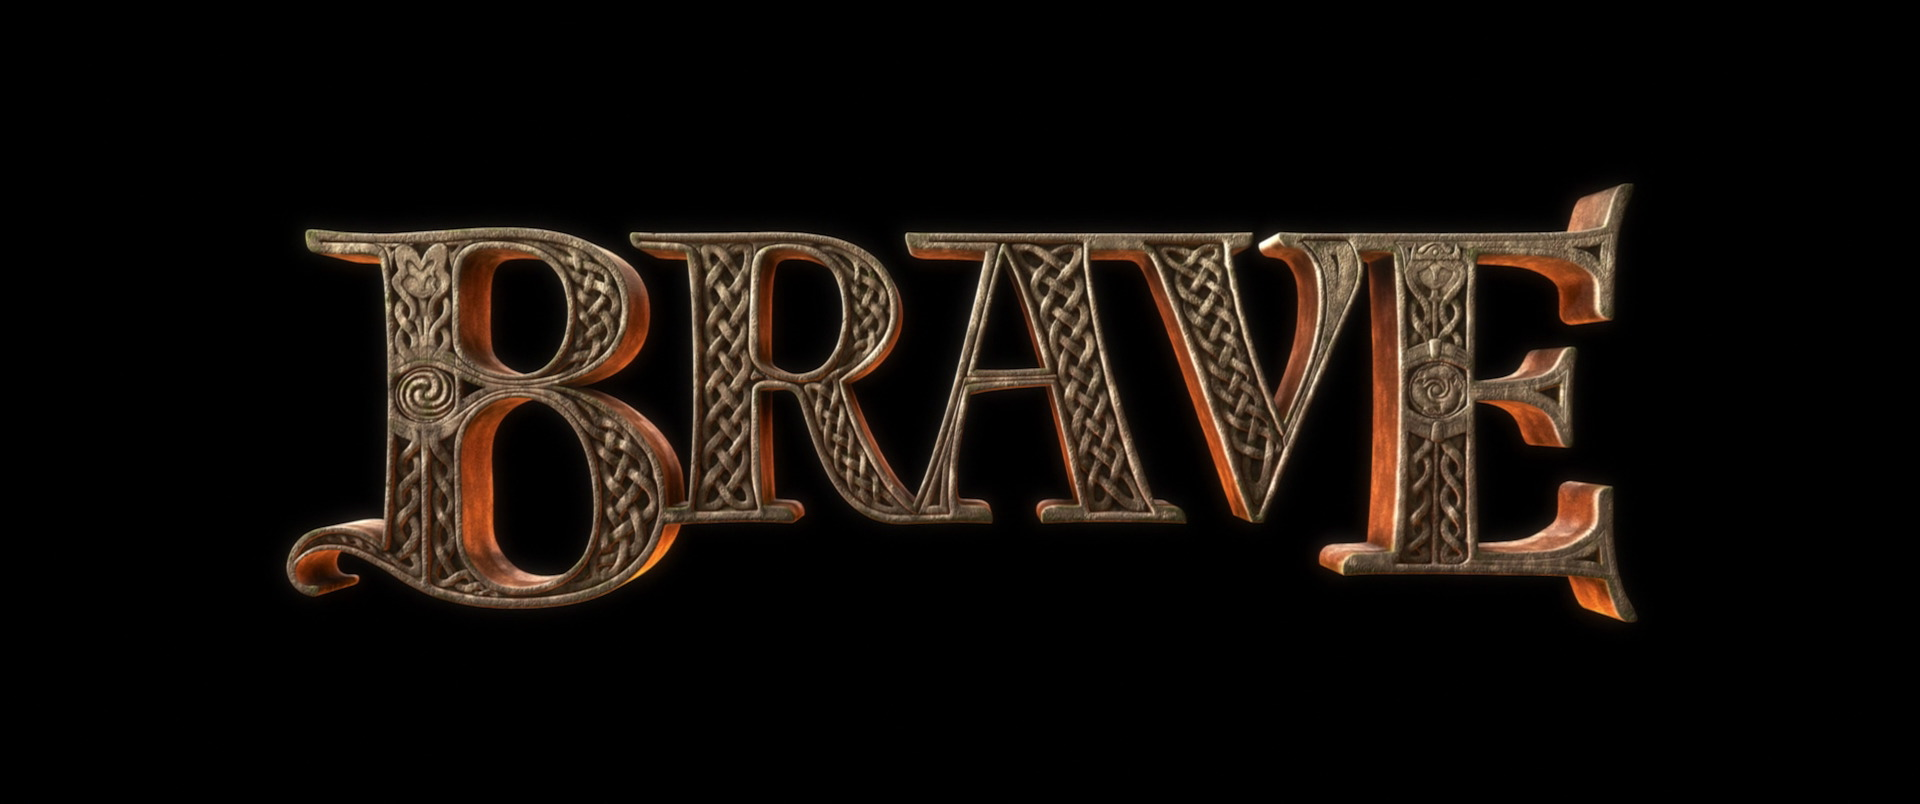 brave 1.52.126 download the new for android